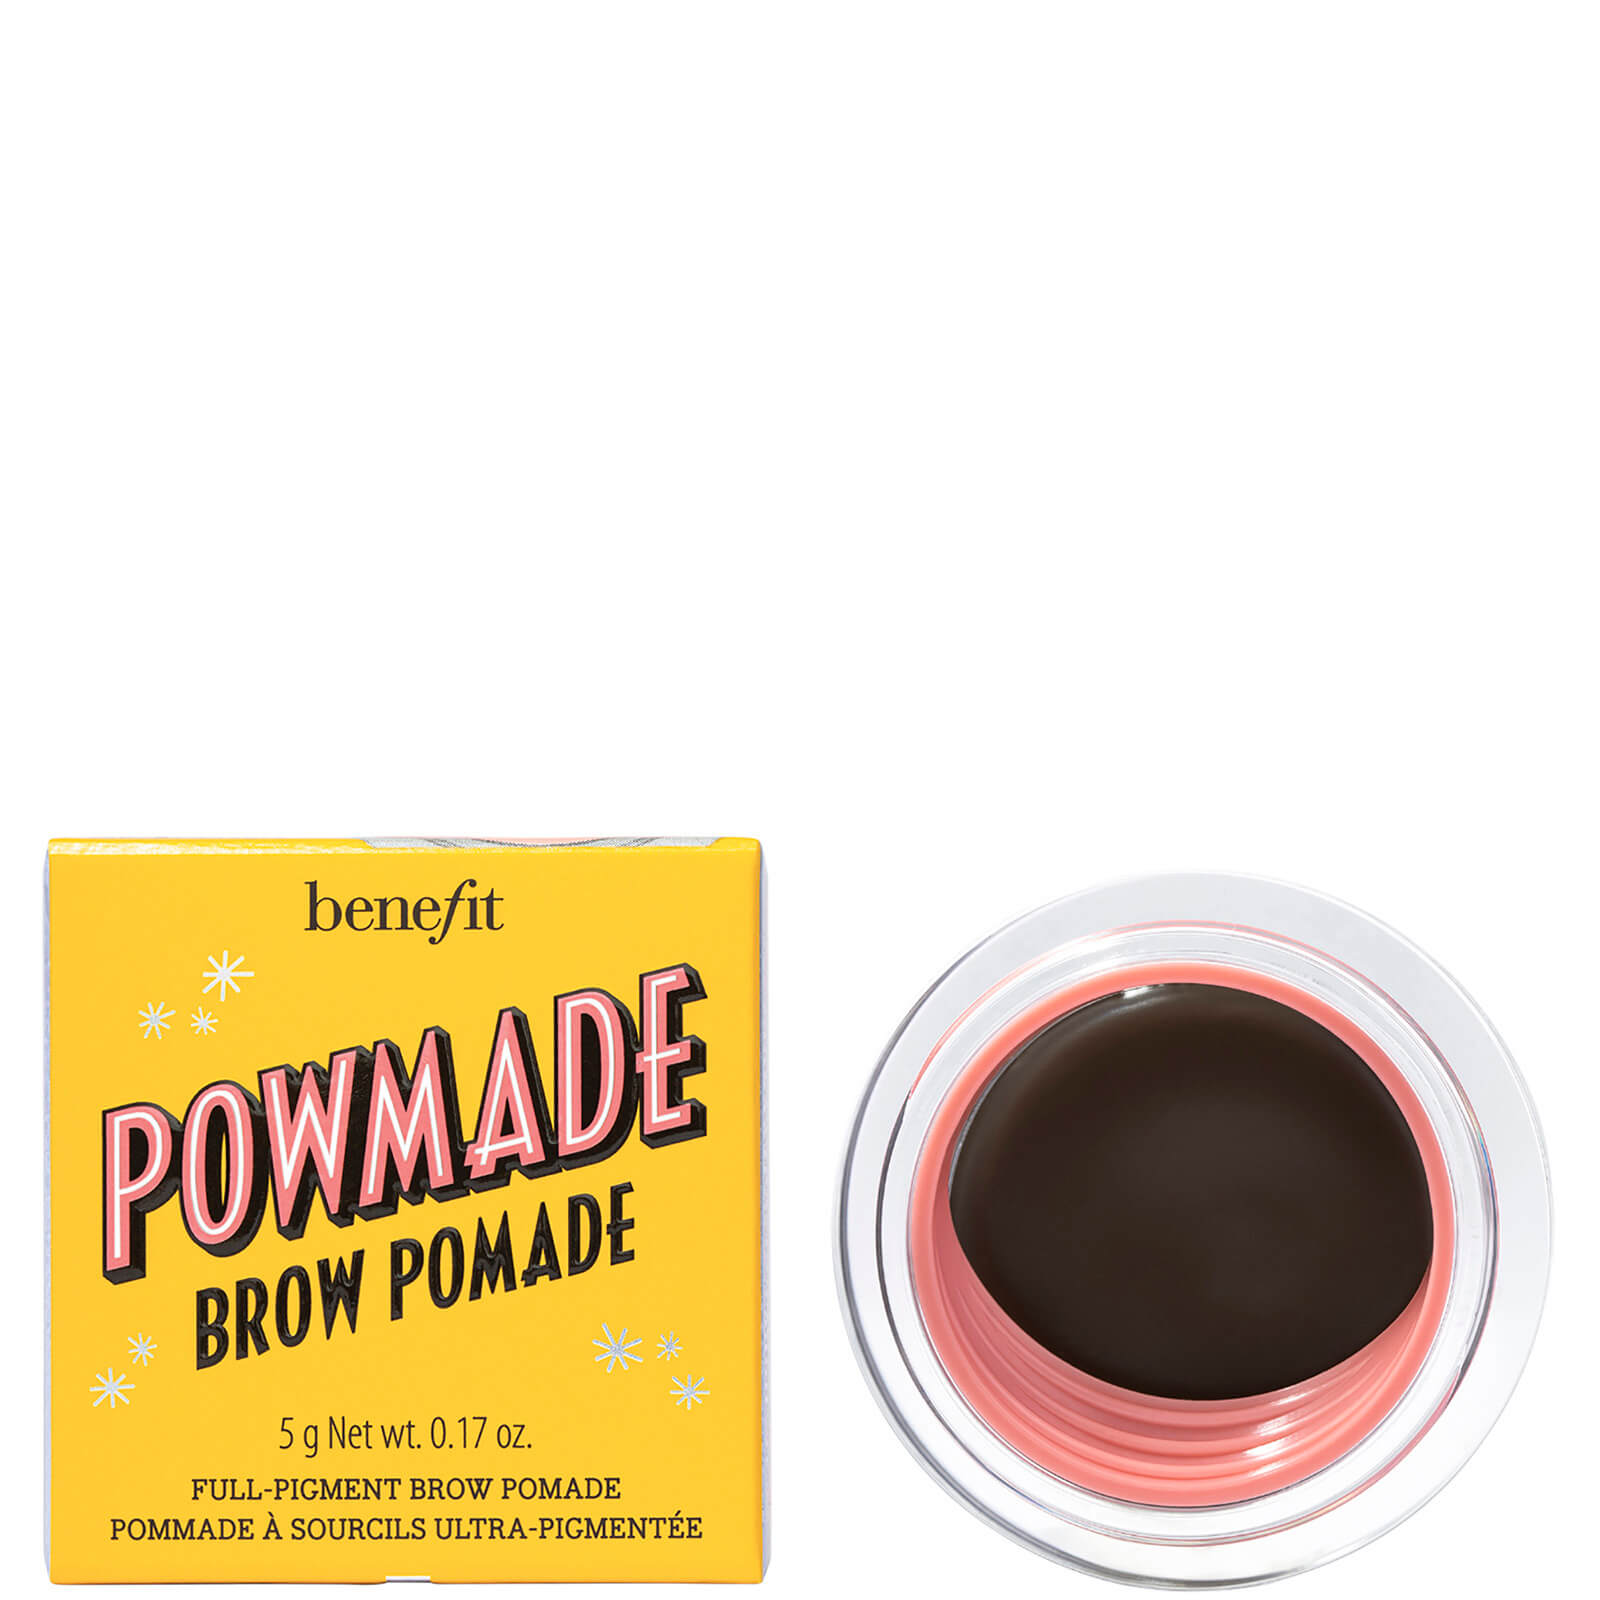 benefit Powmade Full Pigment Eyebrow Pomade 5g (Various Shades) - 4.5 Neutral Deep Brown